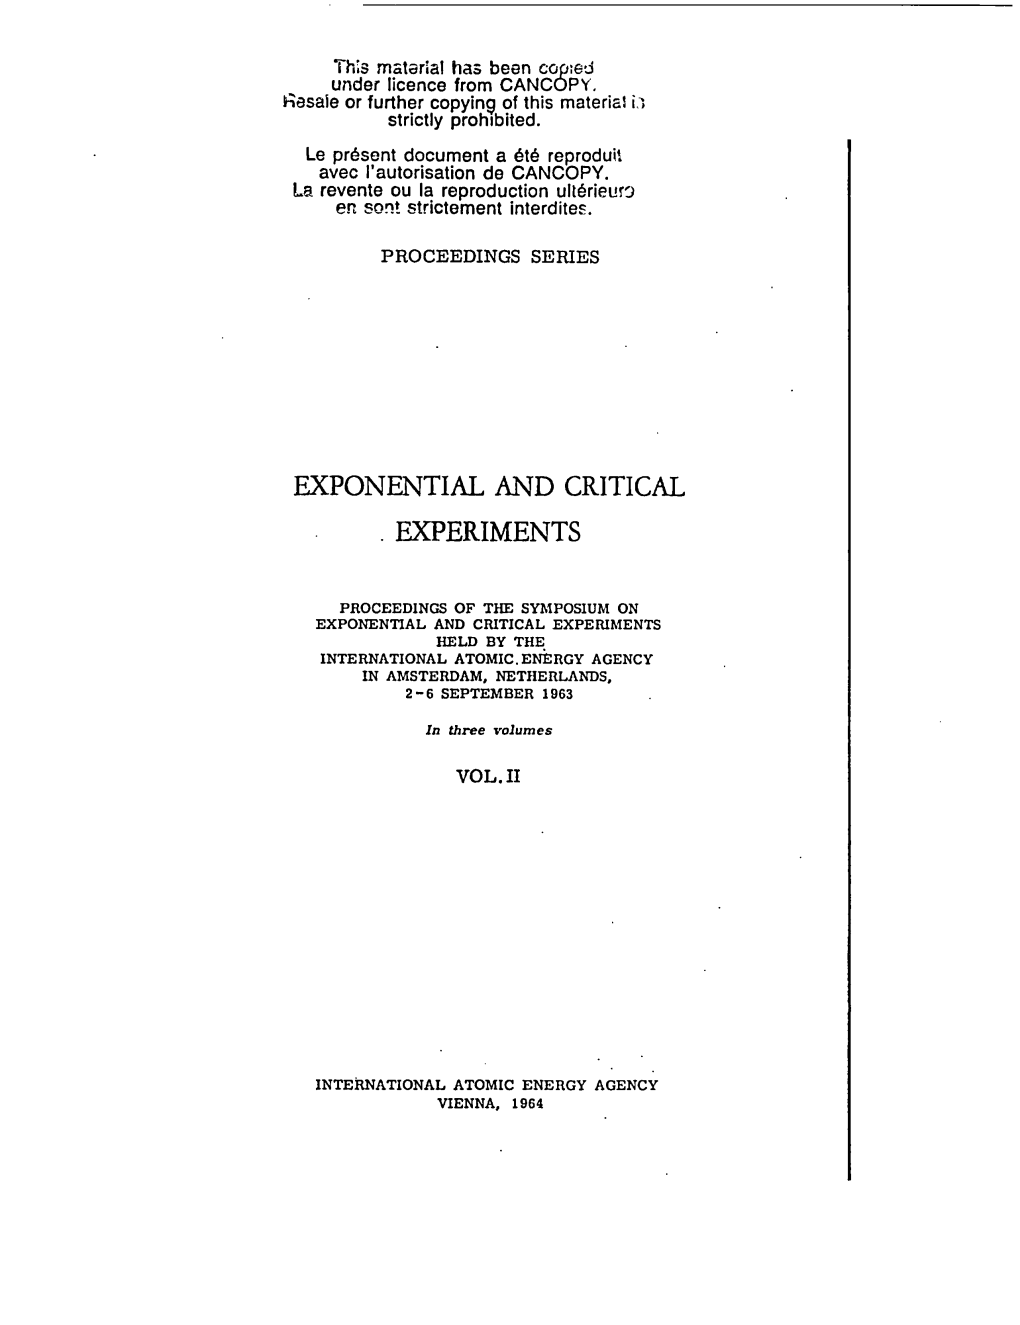 Exponential and Critical Experiments, Proceedings of the Symposium On